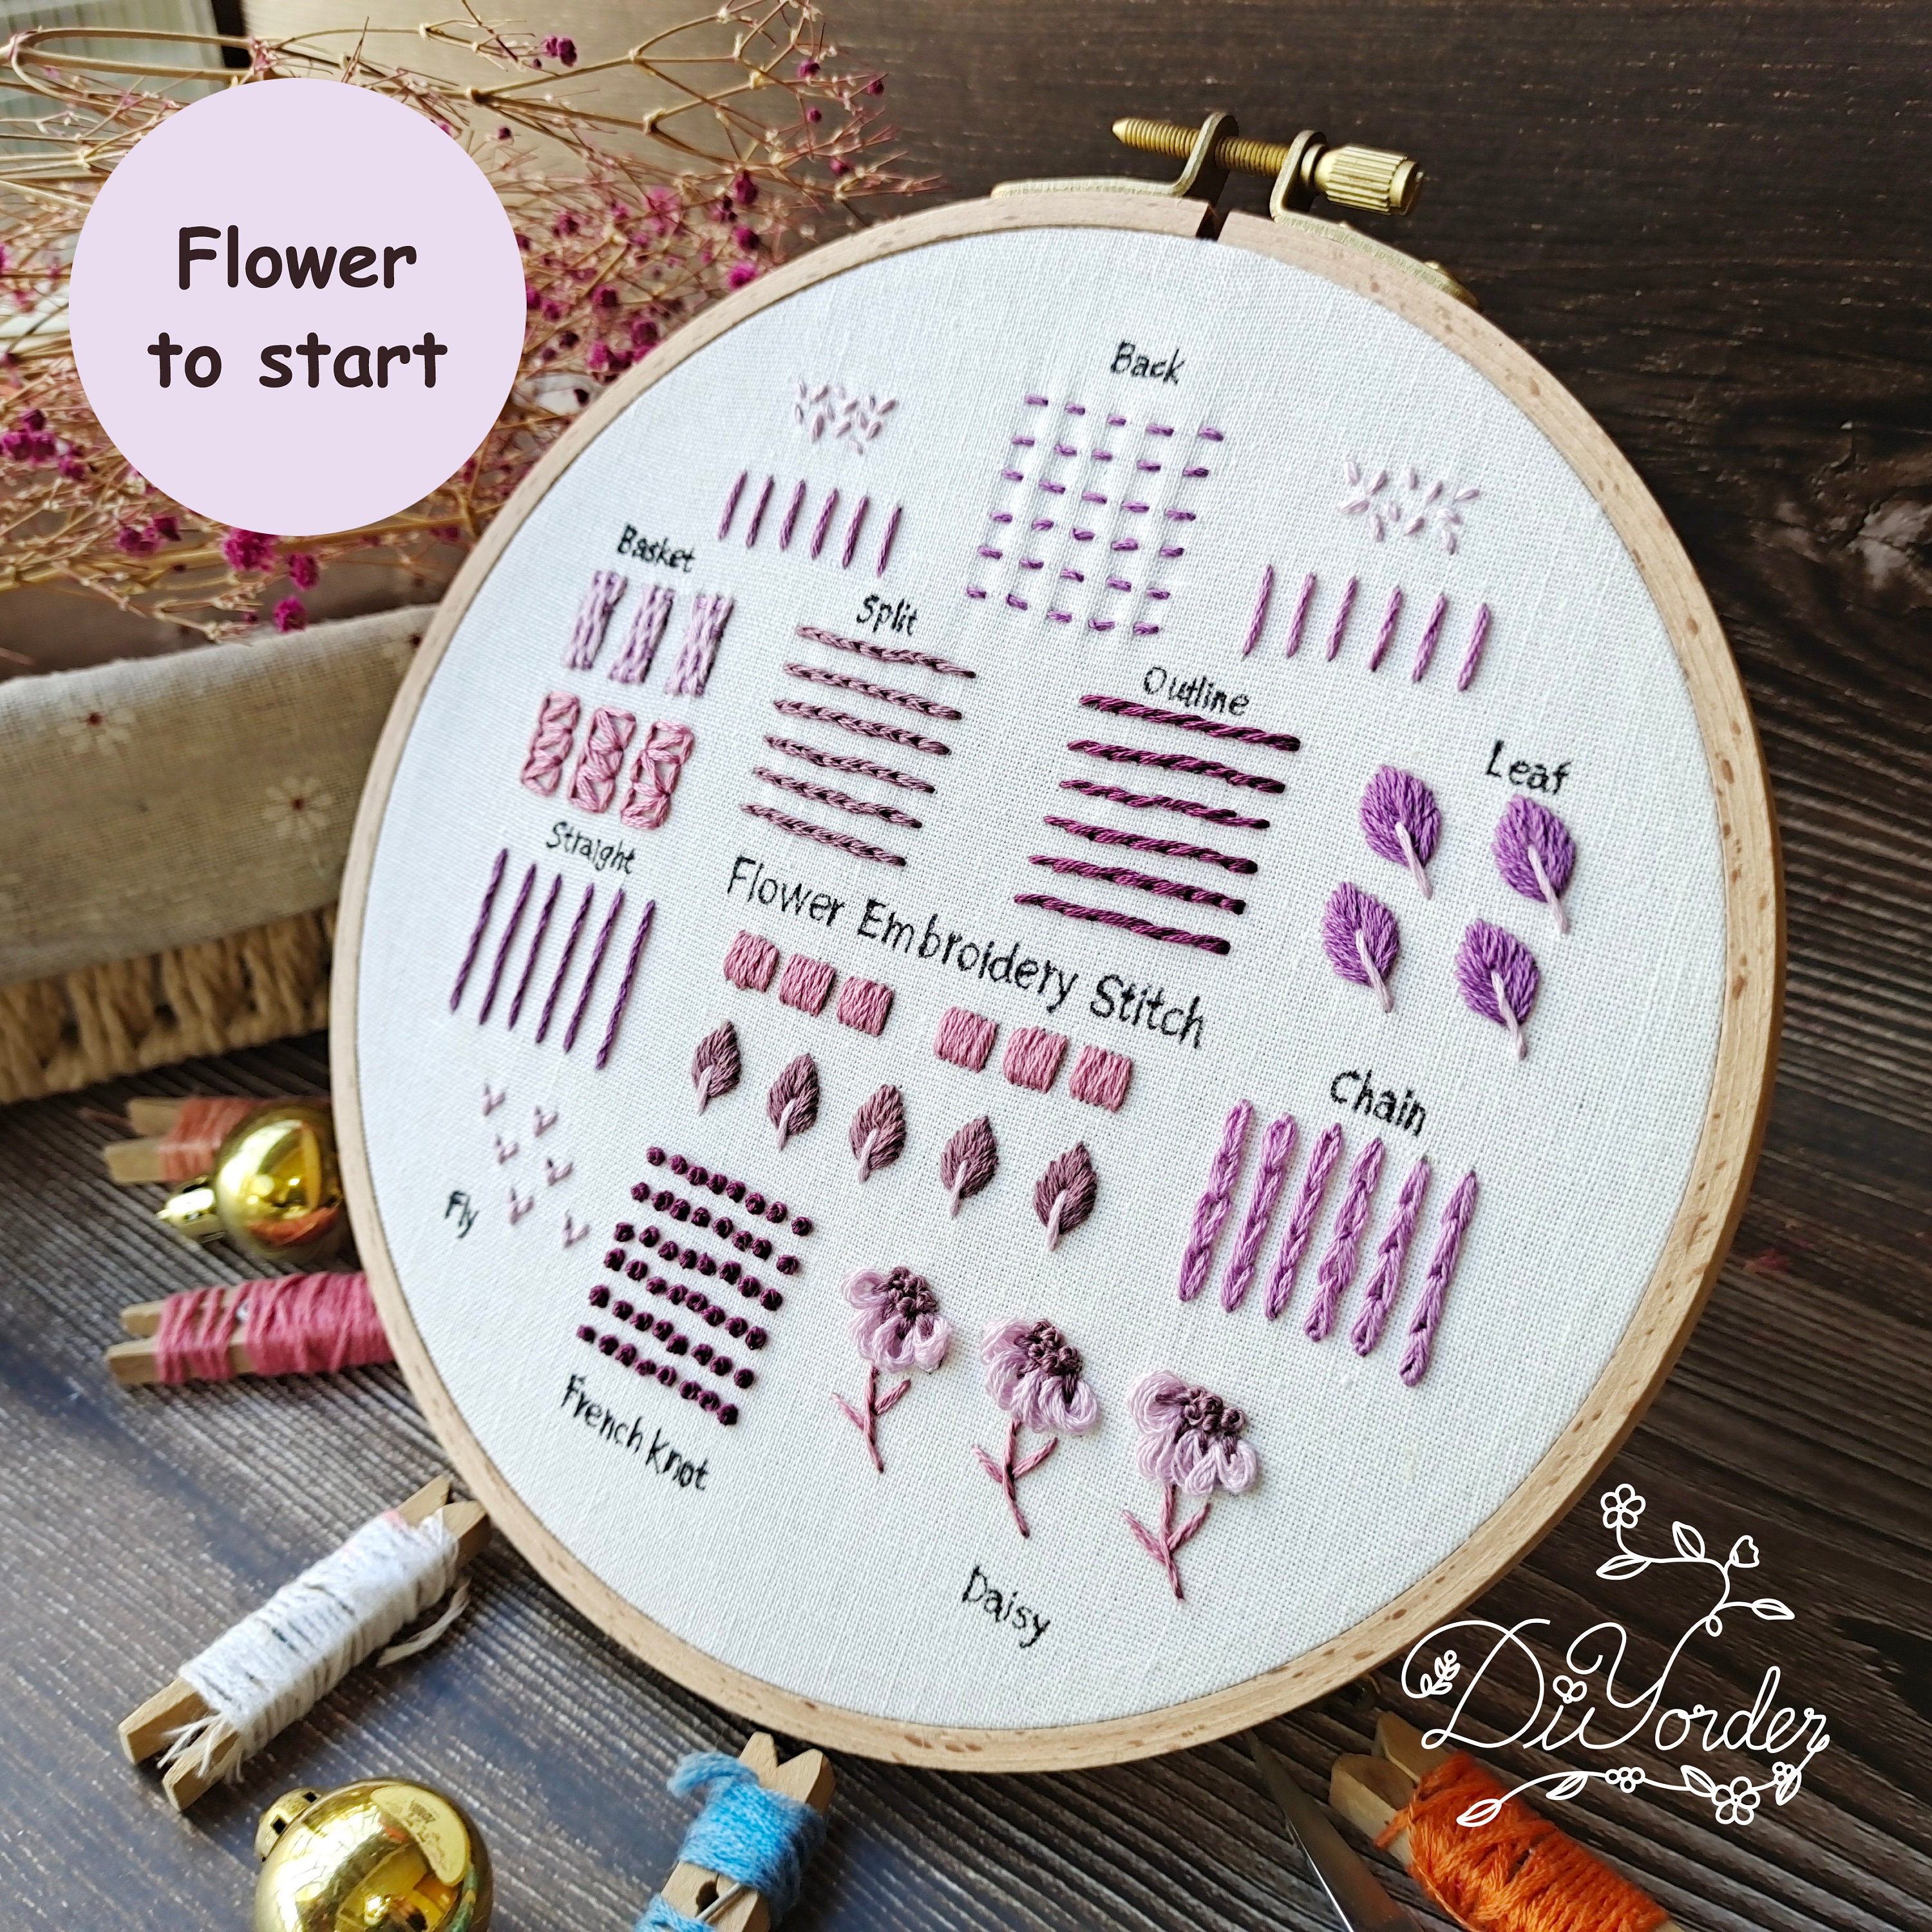 Hand Embroidery Supplies, 7 Must-Haves for Beginners